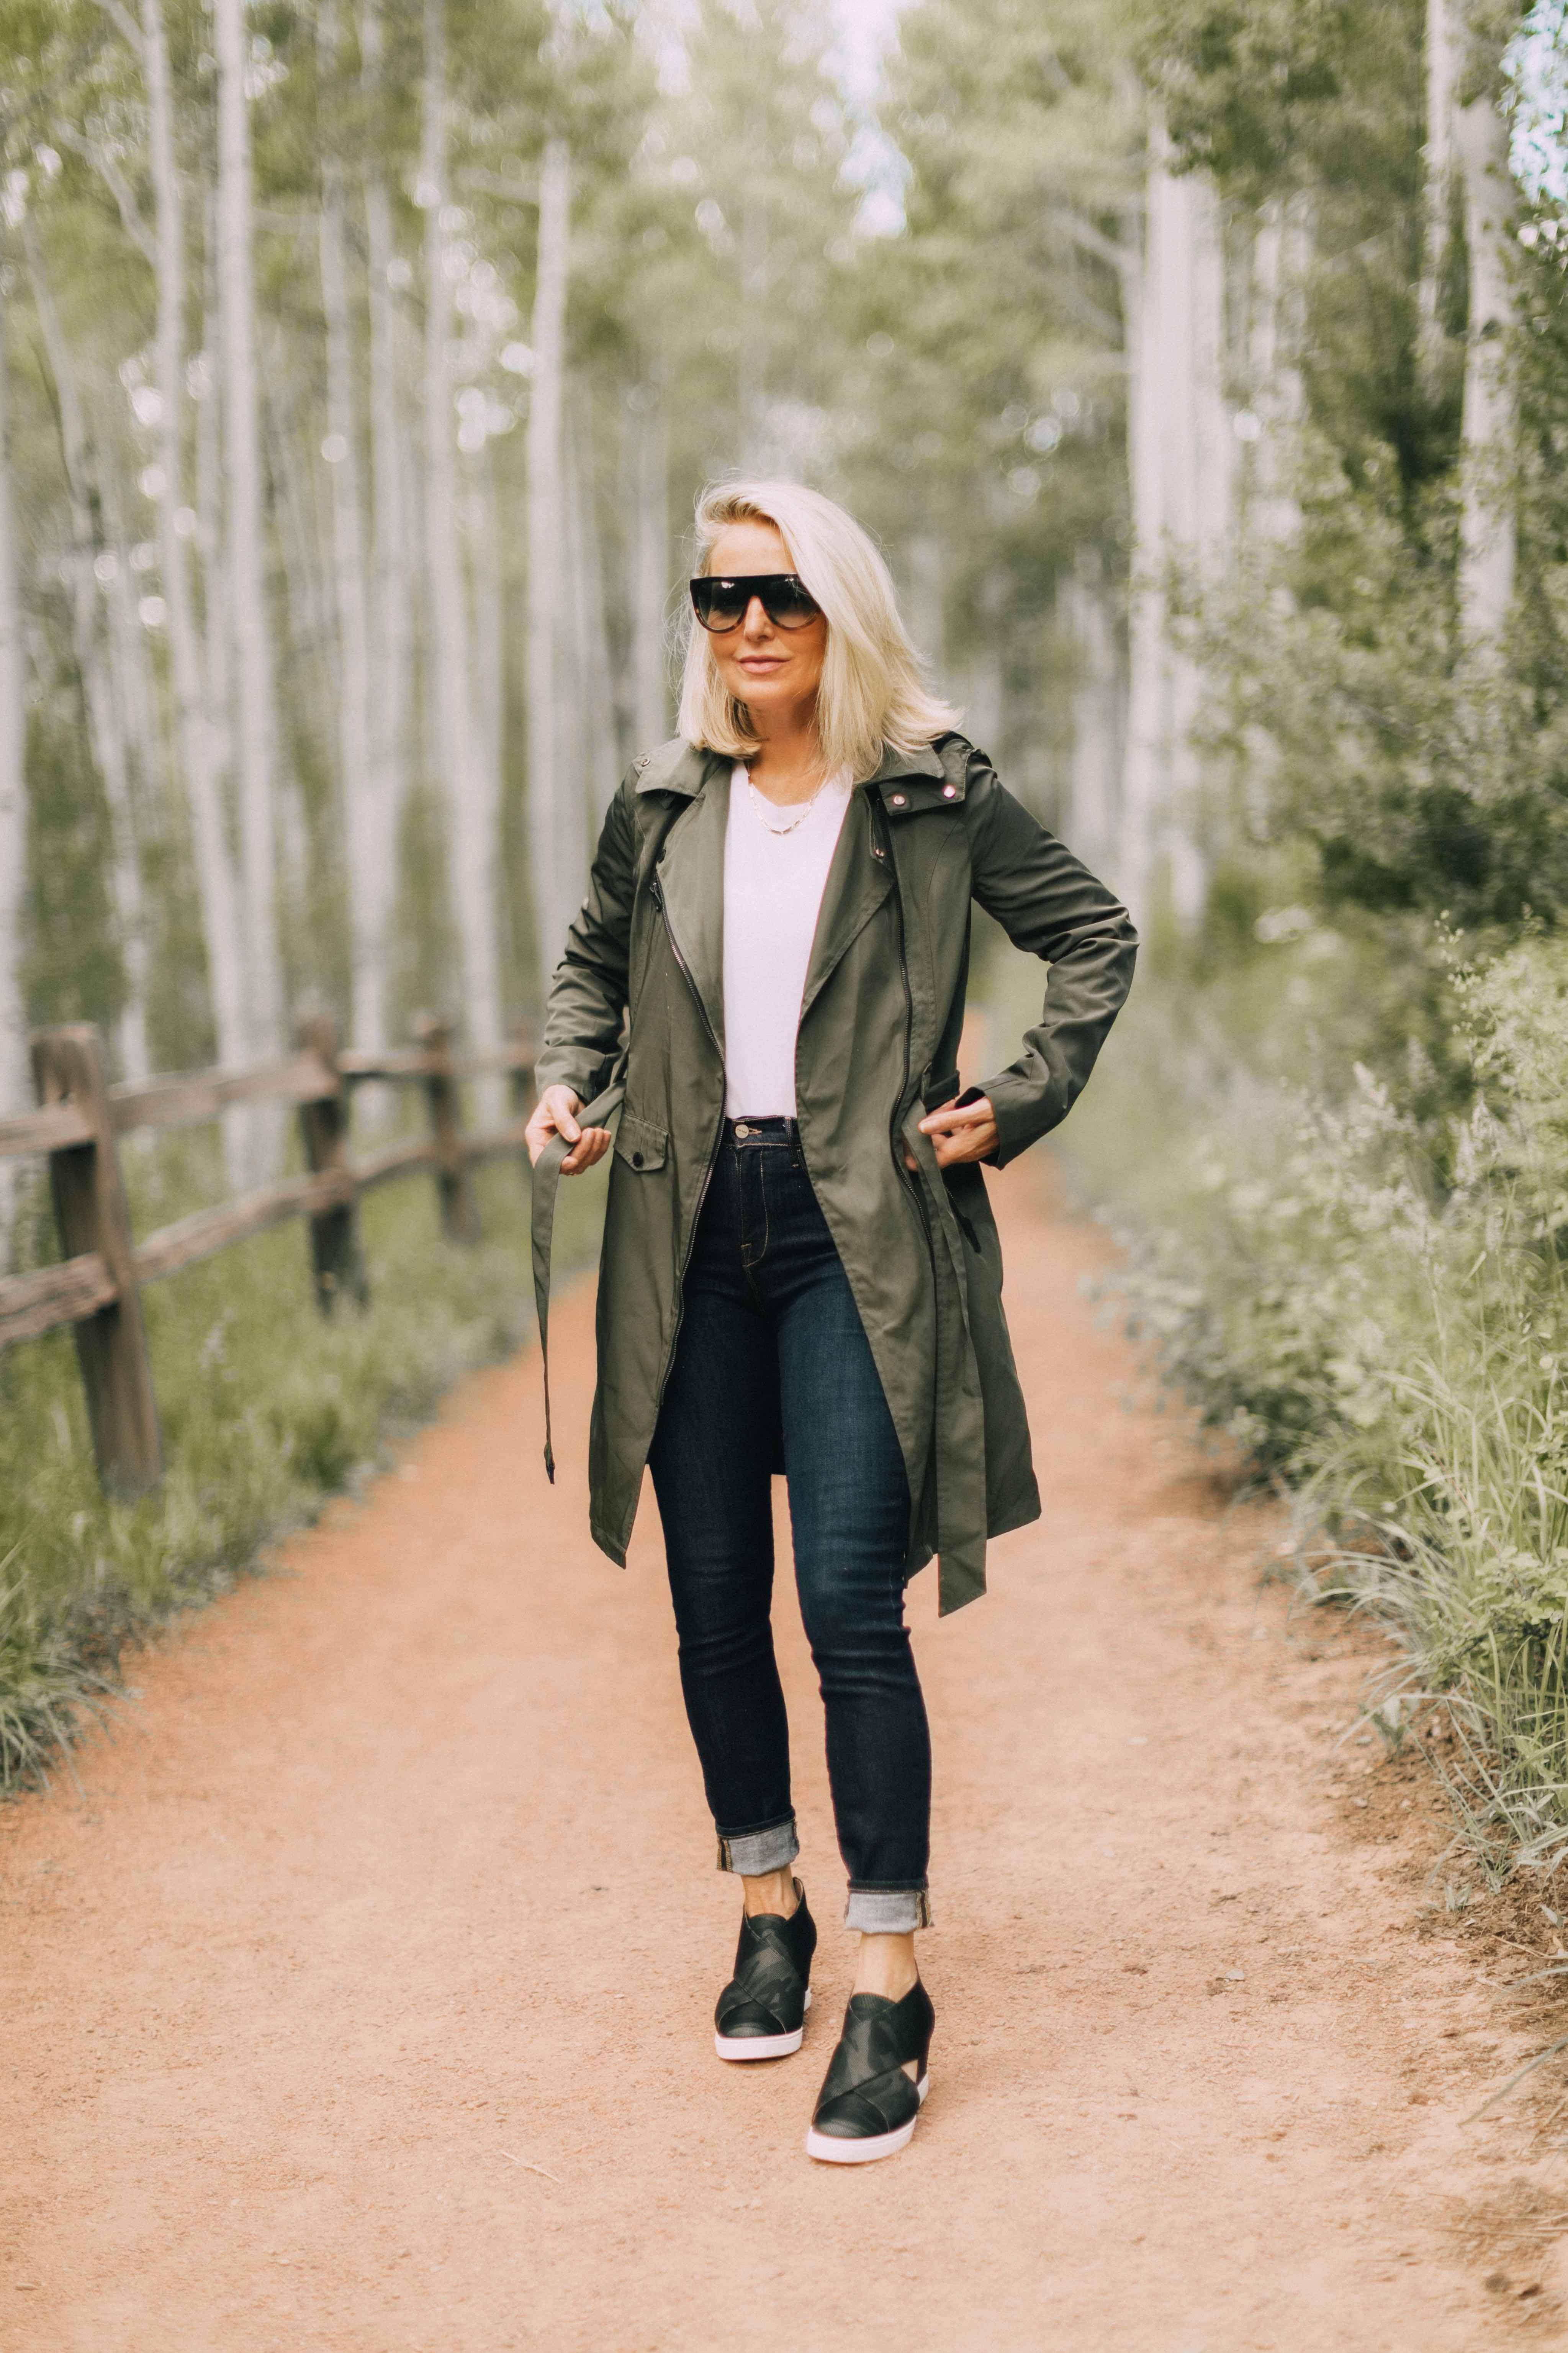 Best Jackets From Nordstrom Anniversary Sale 2019 Including This Avec Les Filles Water Resistant Trench With Moto Details Paired With Linea Paolo Camo Print Sneakers On Fashion Blogger Erin Busbee In Telluride Colorado